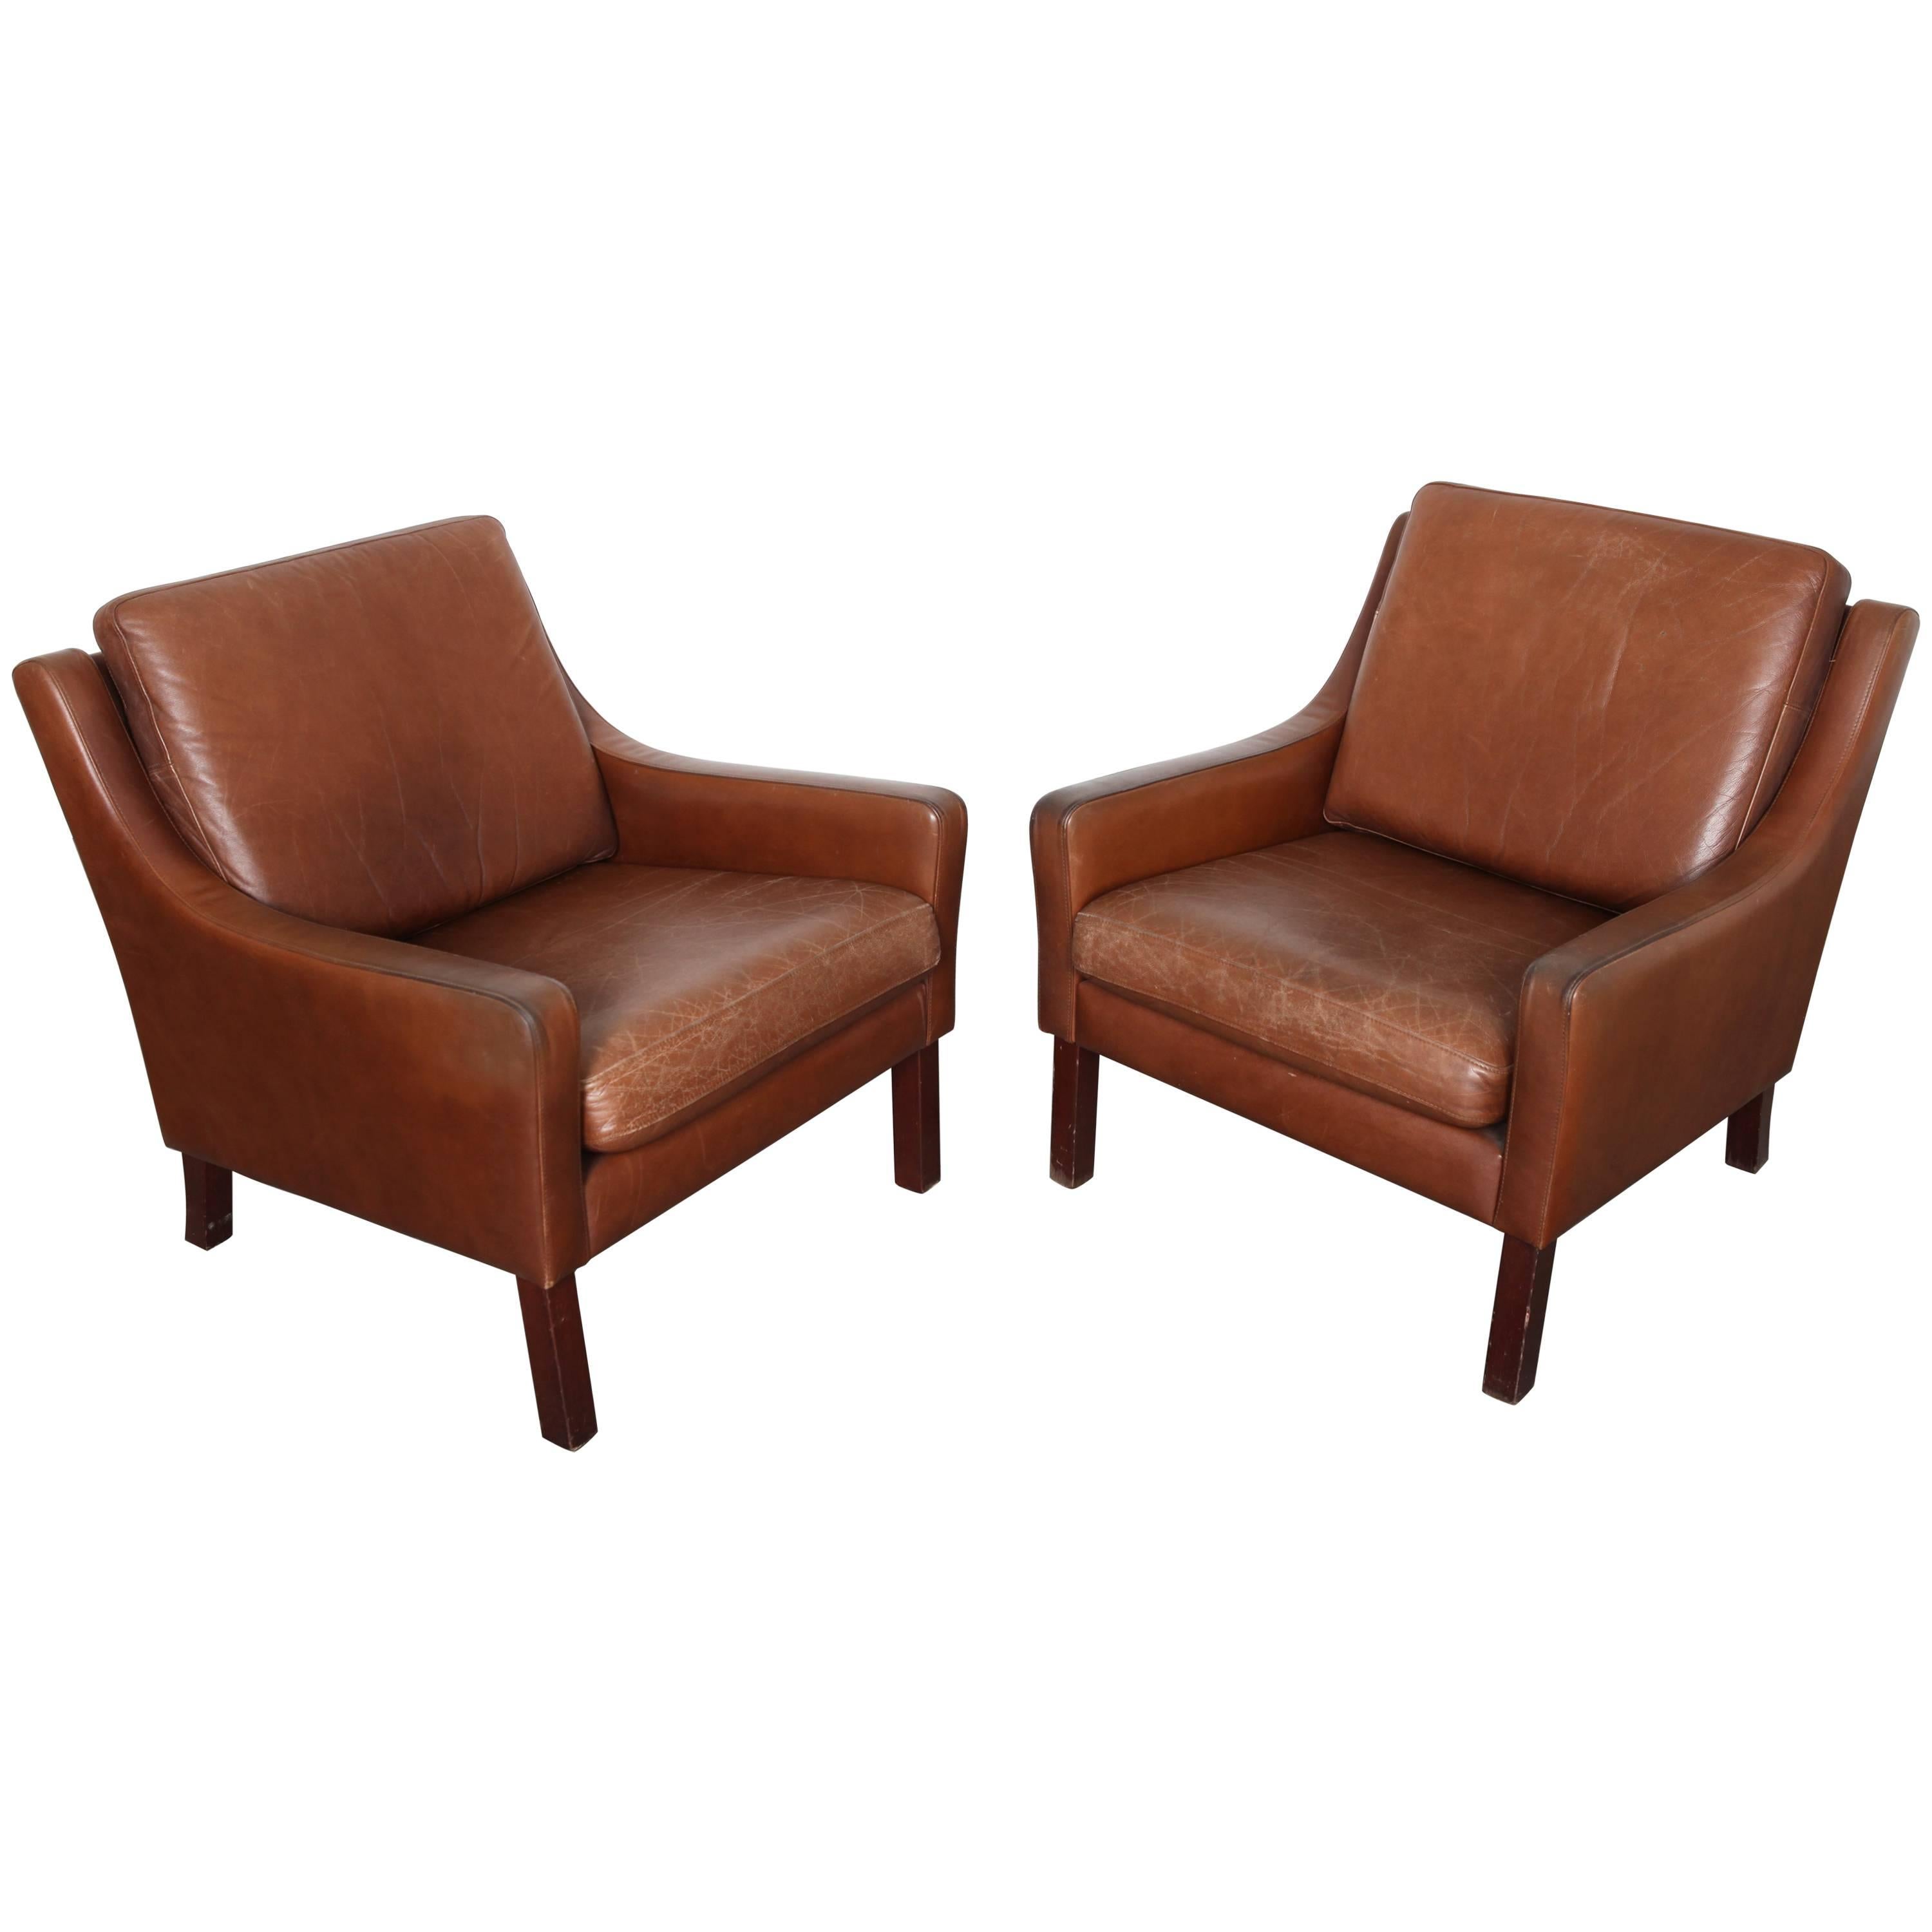 Pair of Mid-Century Modern Swedish Brown Leather Lounge Chairs